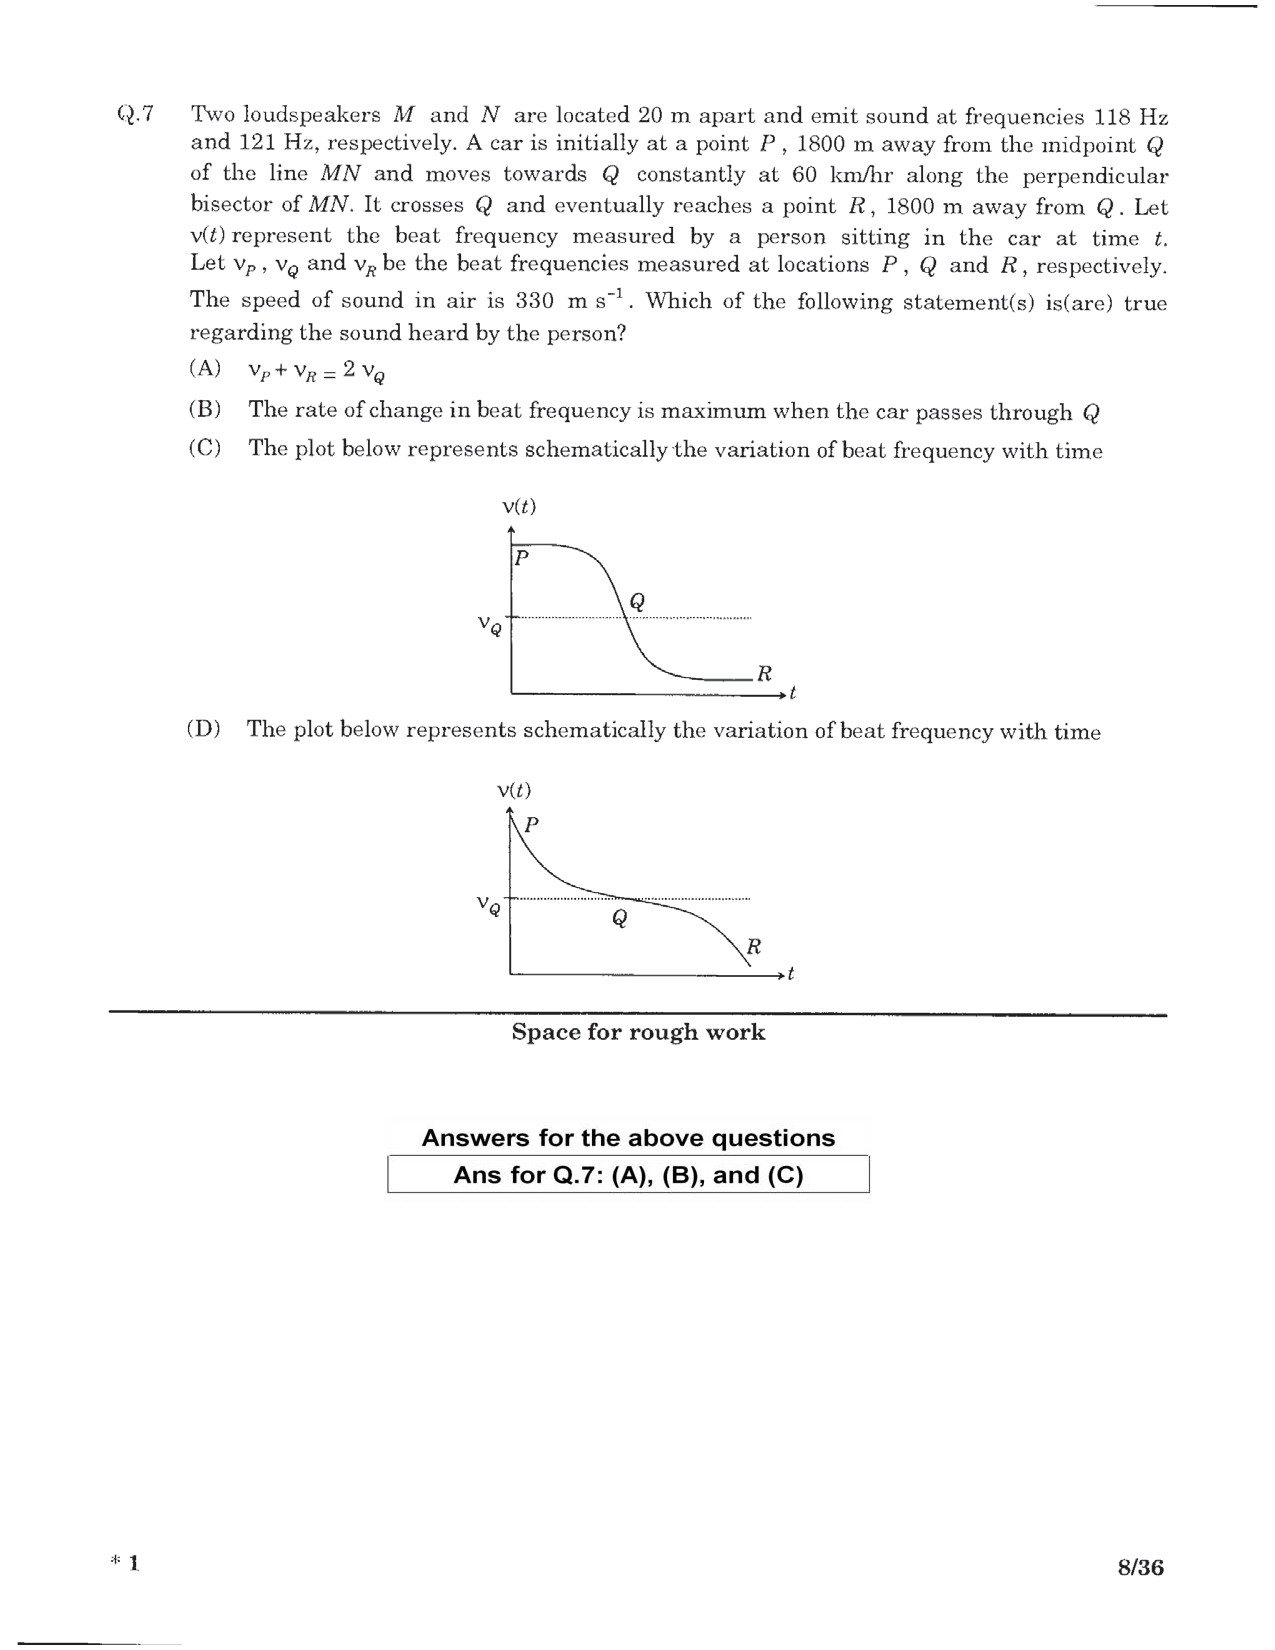 JEE Advanced Exam Question Paper 2016 Paper 1 Physics 6